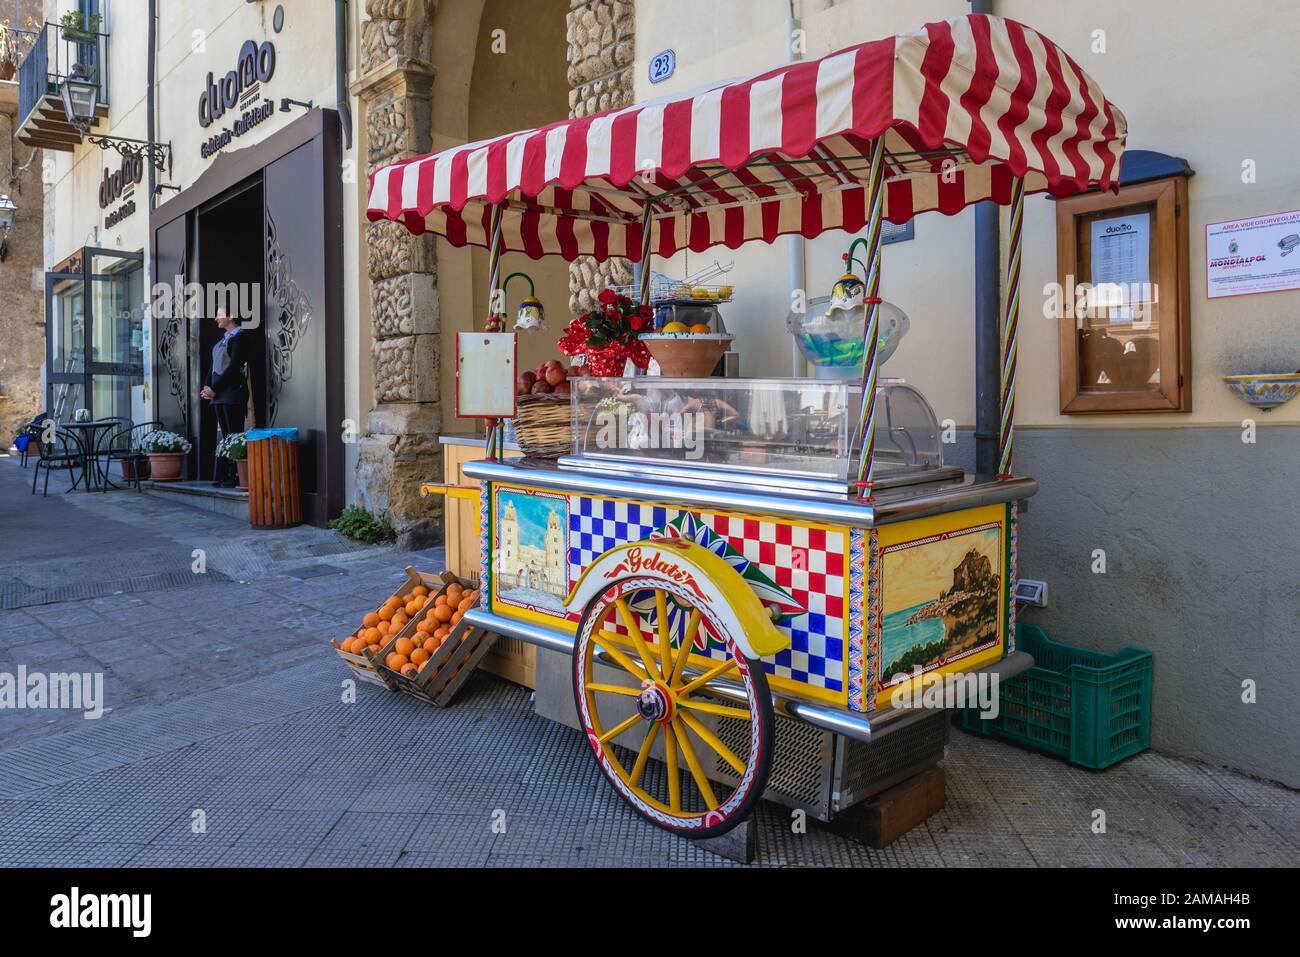 Ice cream and fresh juices cart on Piazza Duomo in Cefalu city located on the Tyrrhenian coast of Sicily, Italy Stock Photo